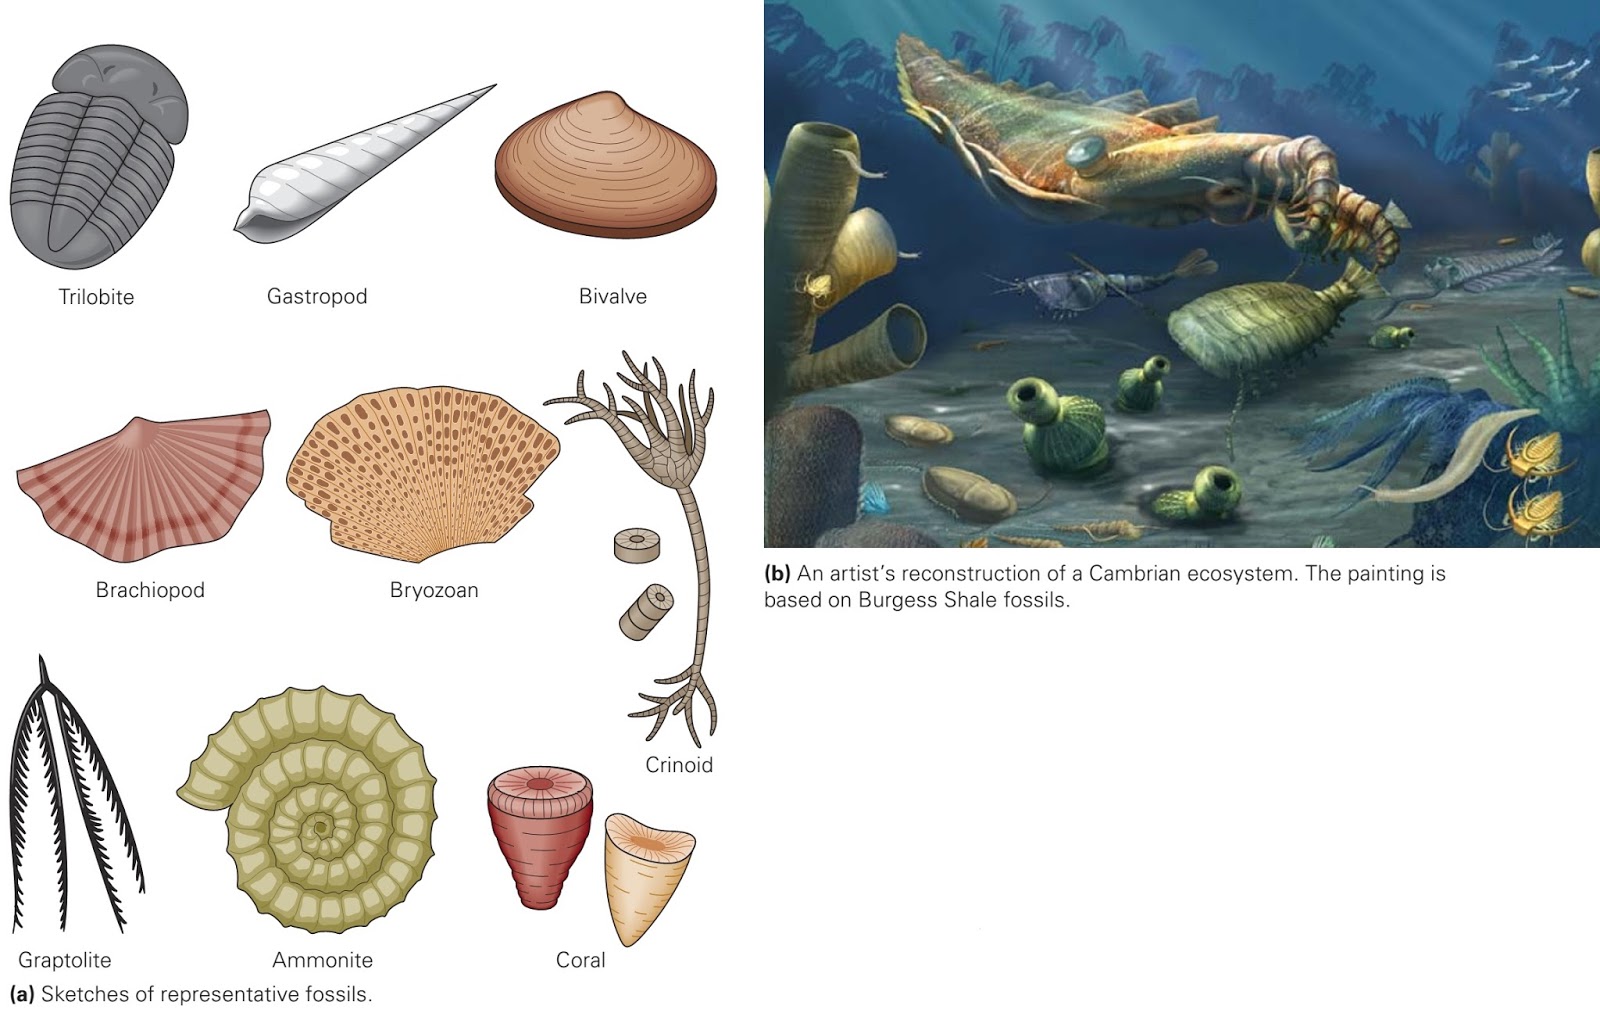 Learning Geology: Taxonomy and Identiﬁcation of fossils